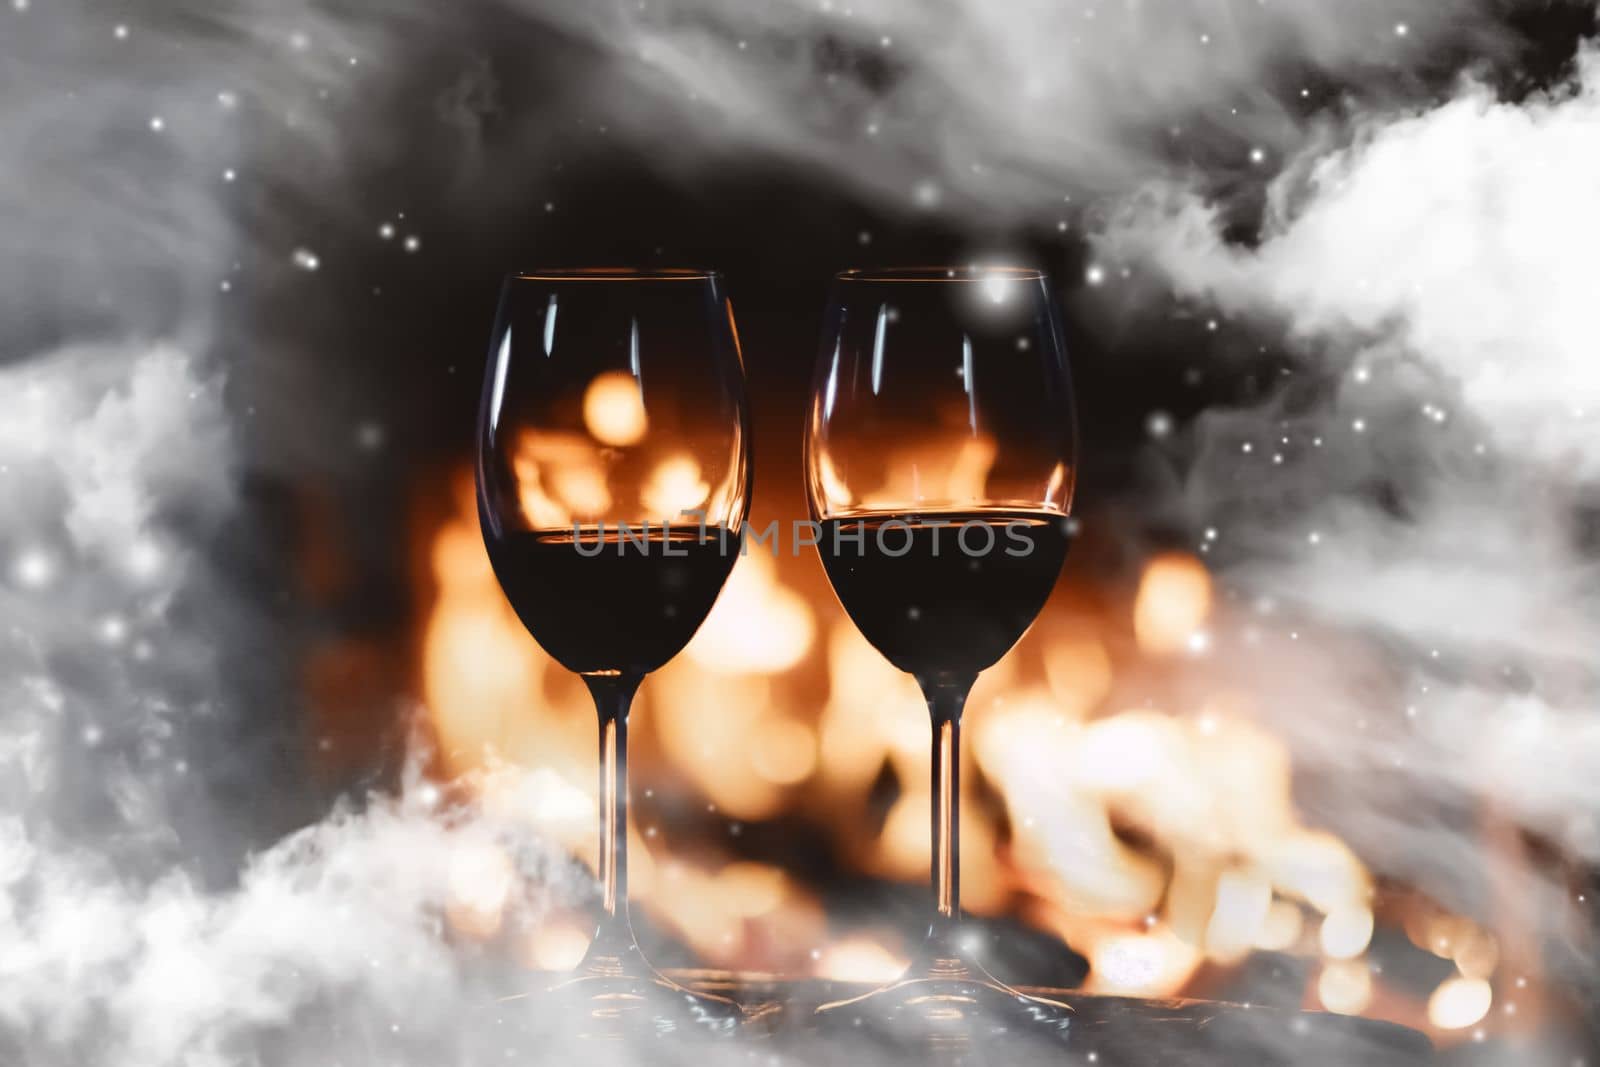 Winter atmosphere and Christmas holiday time, wine glasses in front of fireplace covered with snowy effect on window glass, holidays background by Anneleven